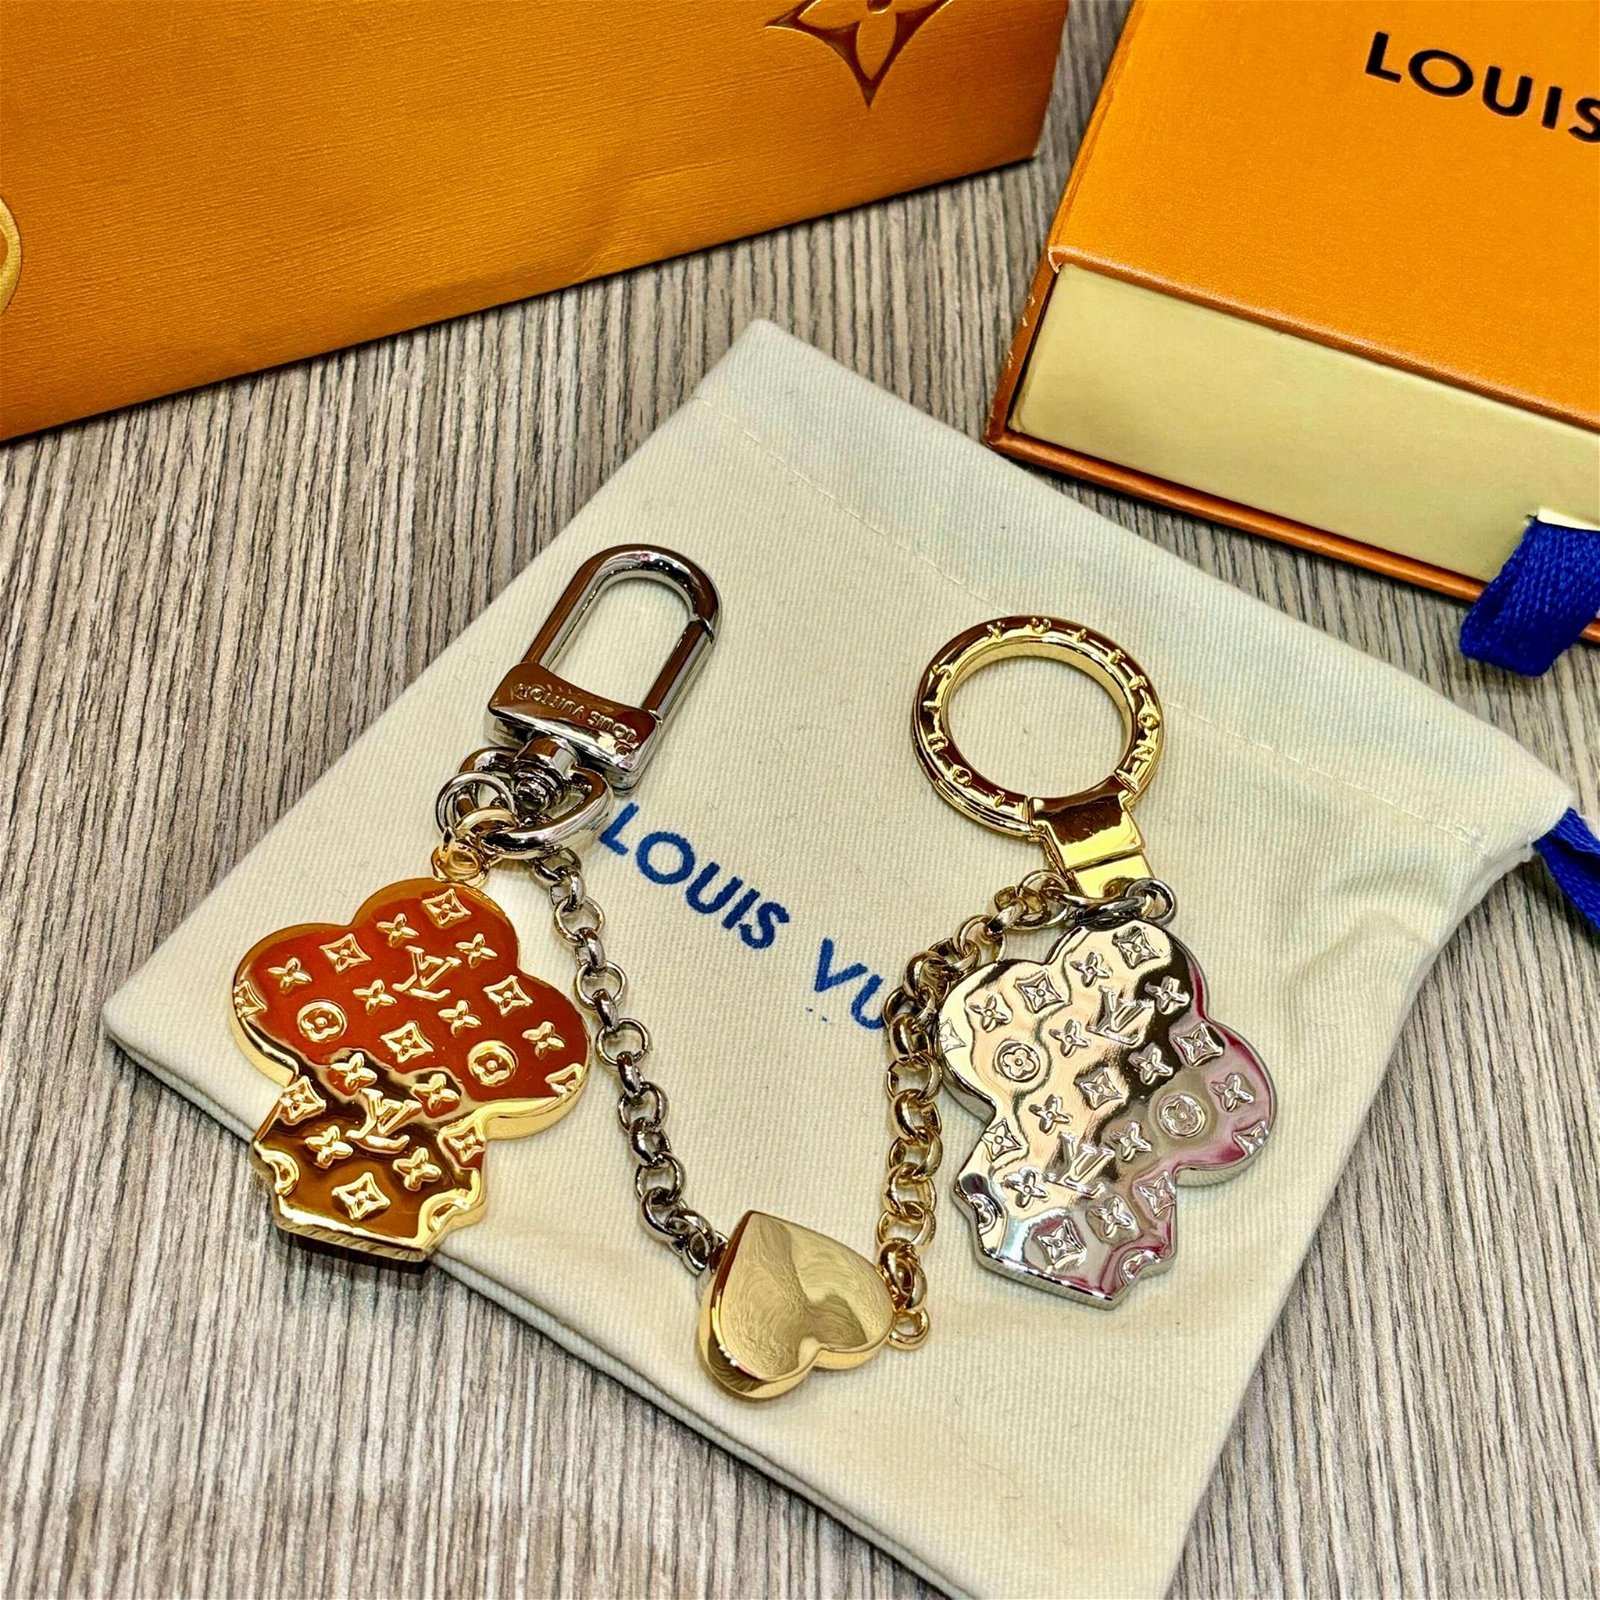 new                   ey chain Fashionable metal bag decoration bag accessories  3